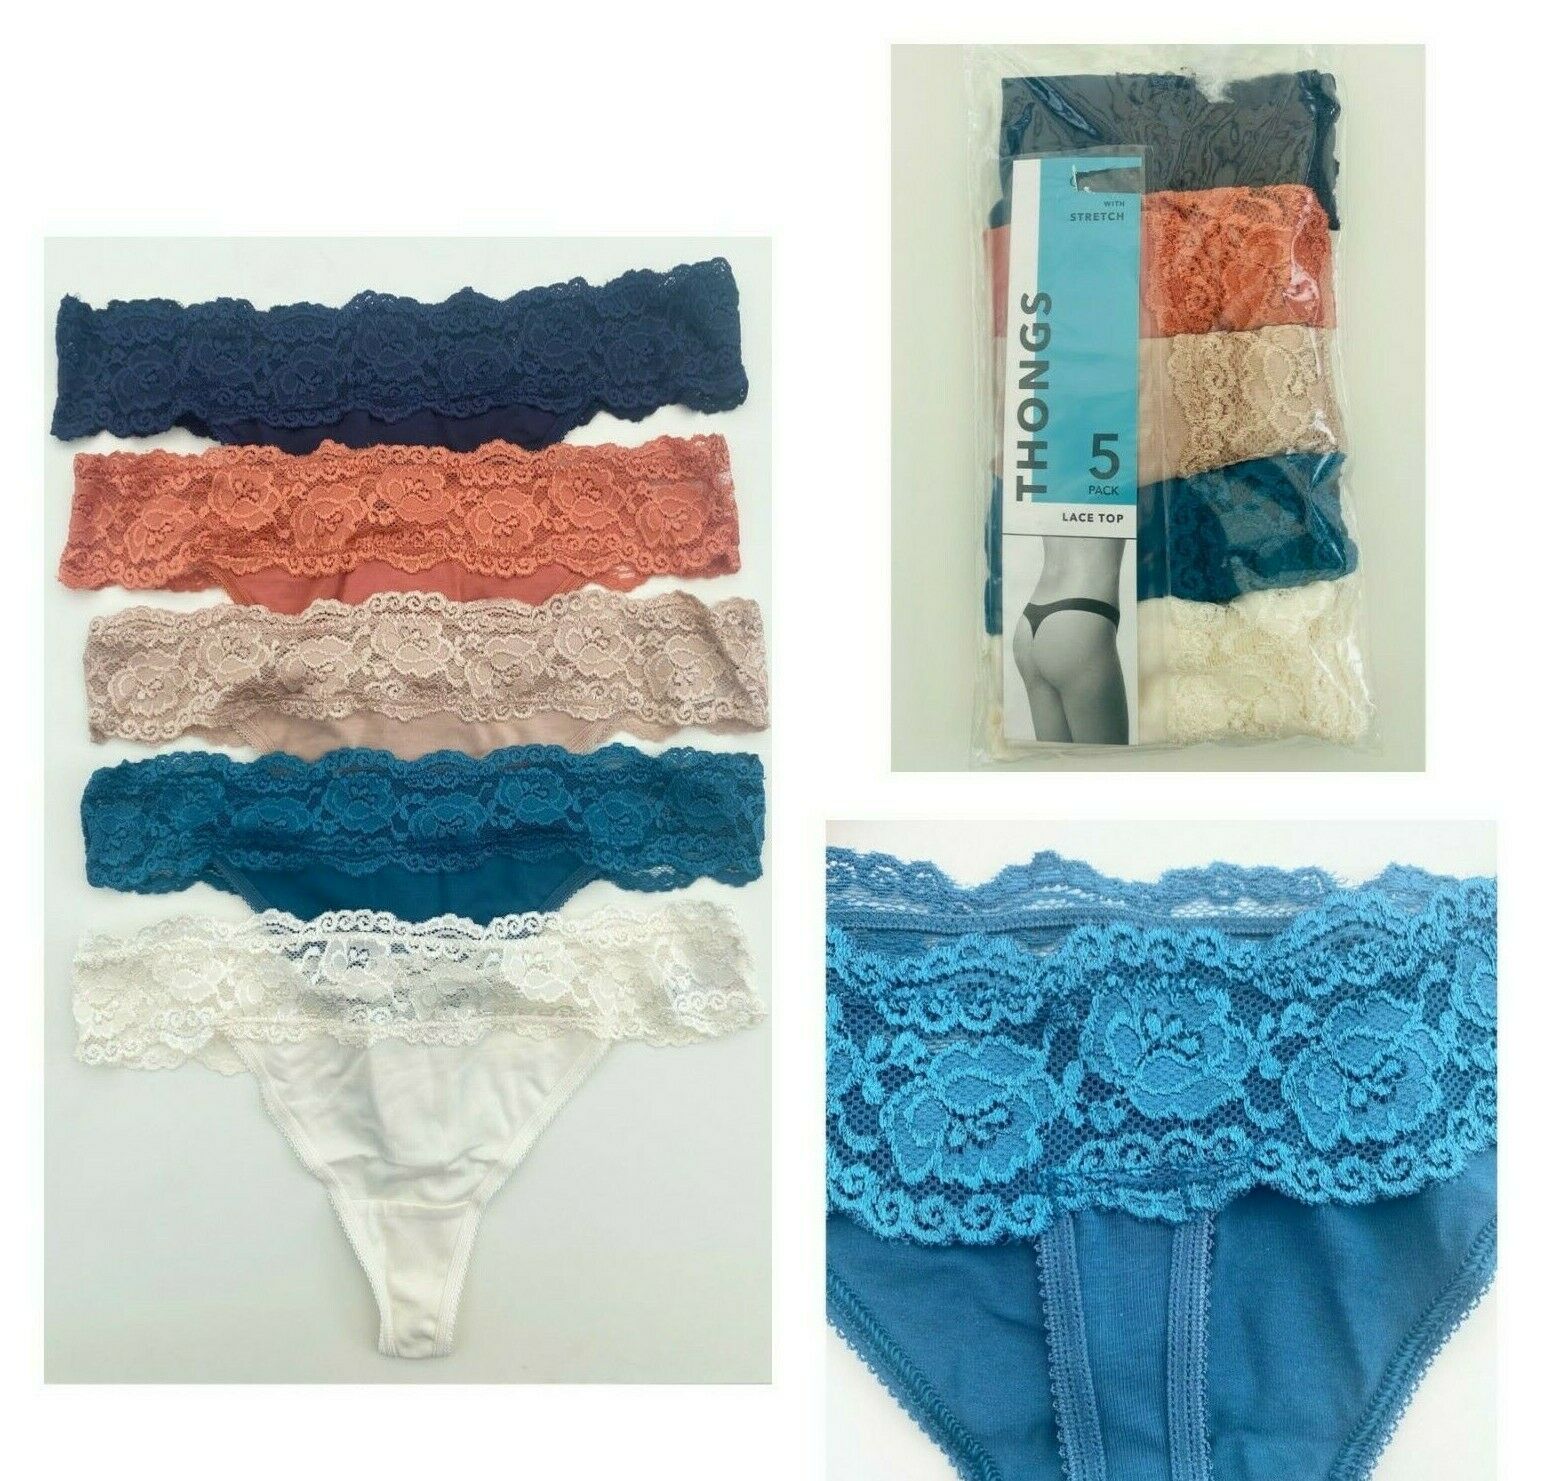 Ladies 5 Pack Thongs G*orge Multi-Pack Lace Top Cotton Knickers